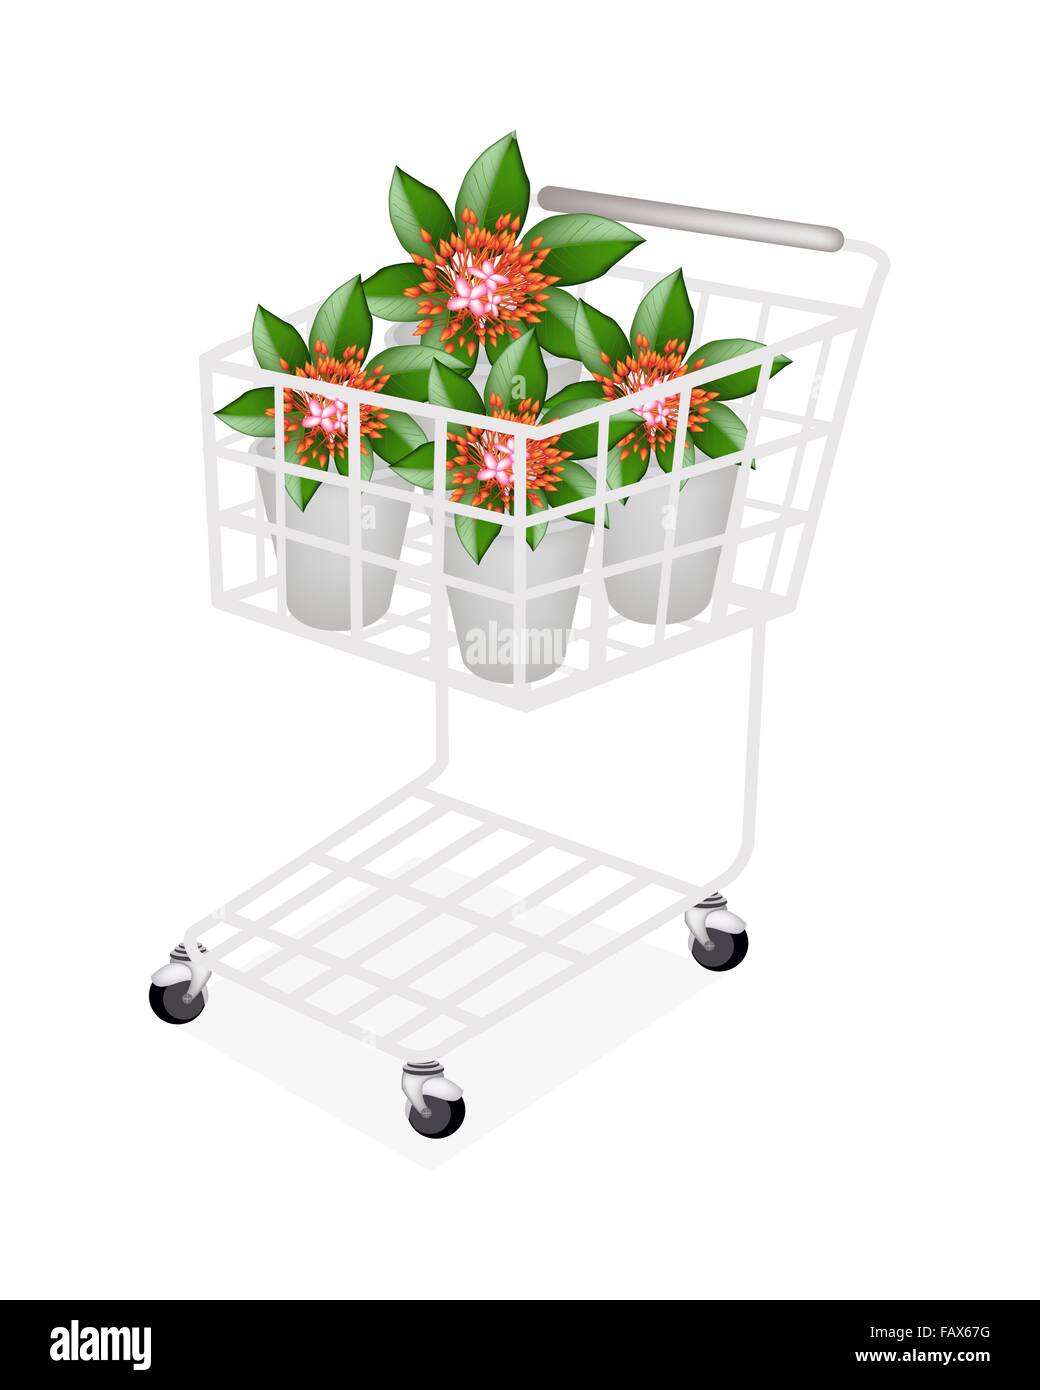 Beautiful Flower, A Shopping Cart Full with Red Ixora Flowers on Green Leaves in A Flowerpot for Garden Decoration Stock Photo